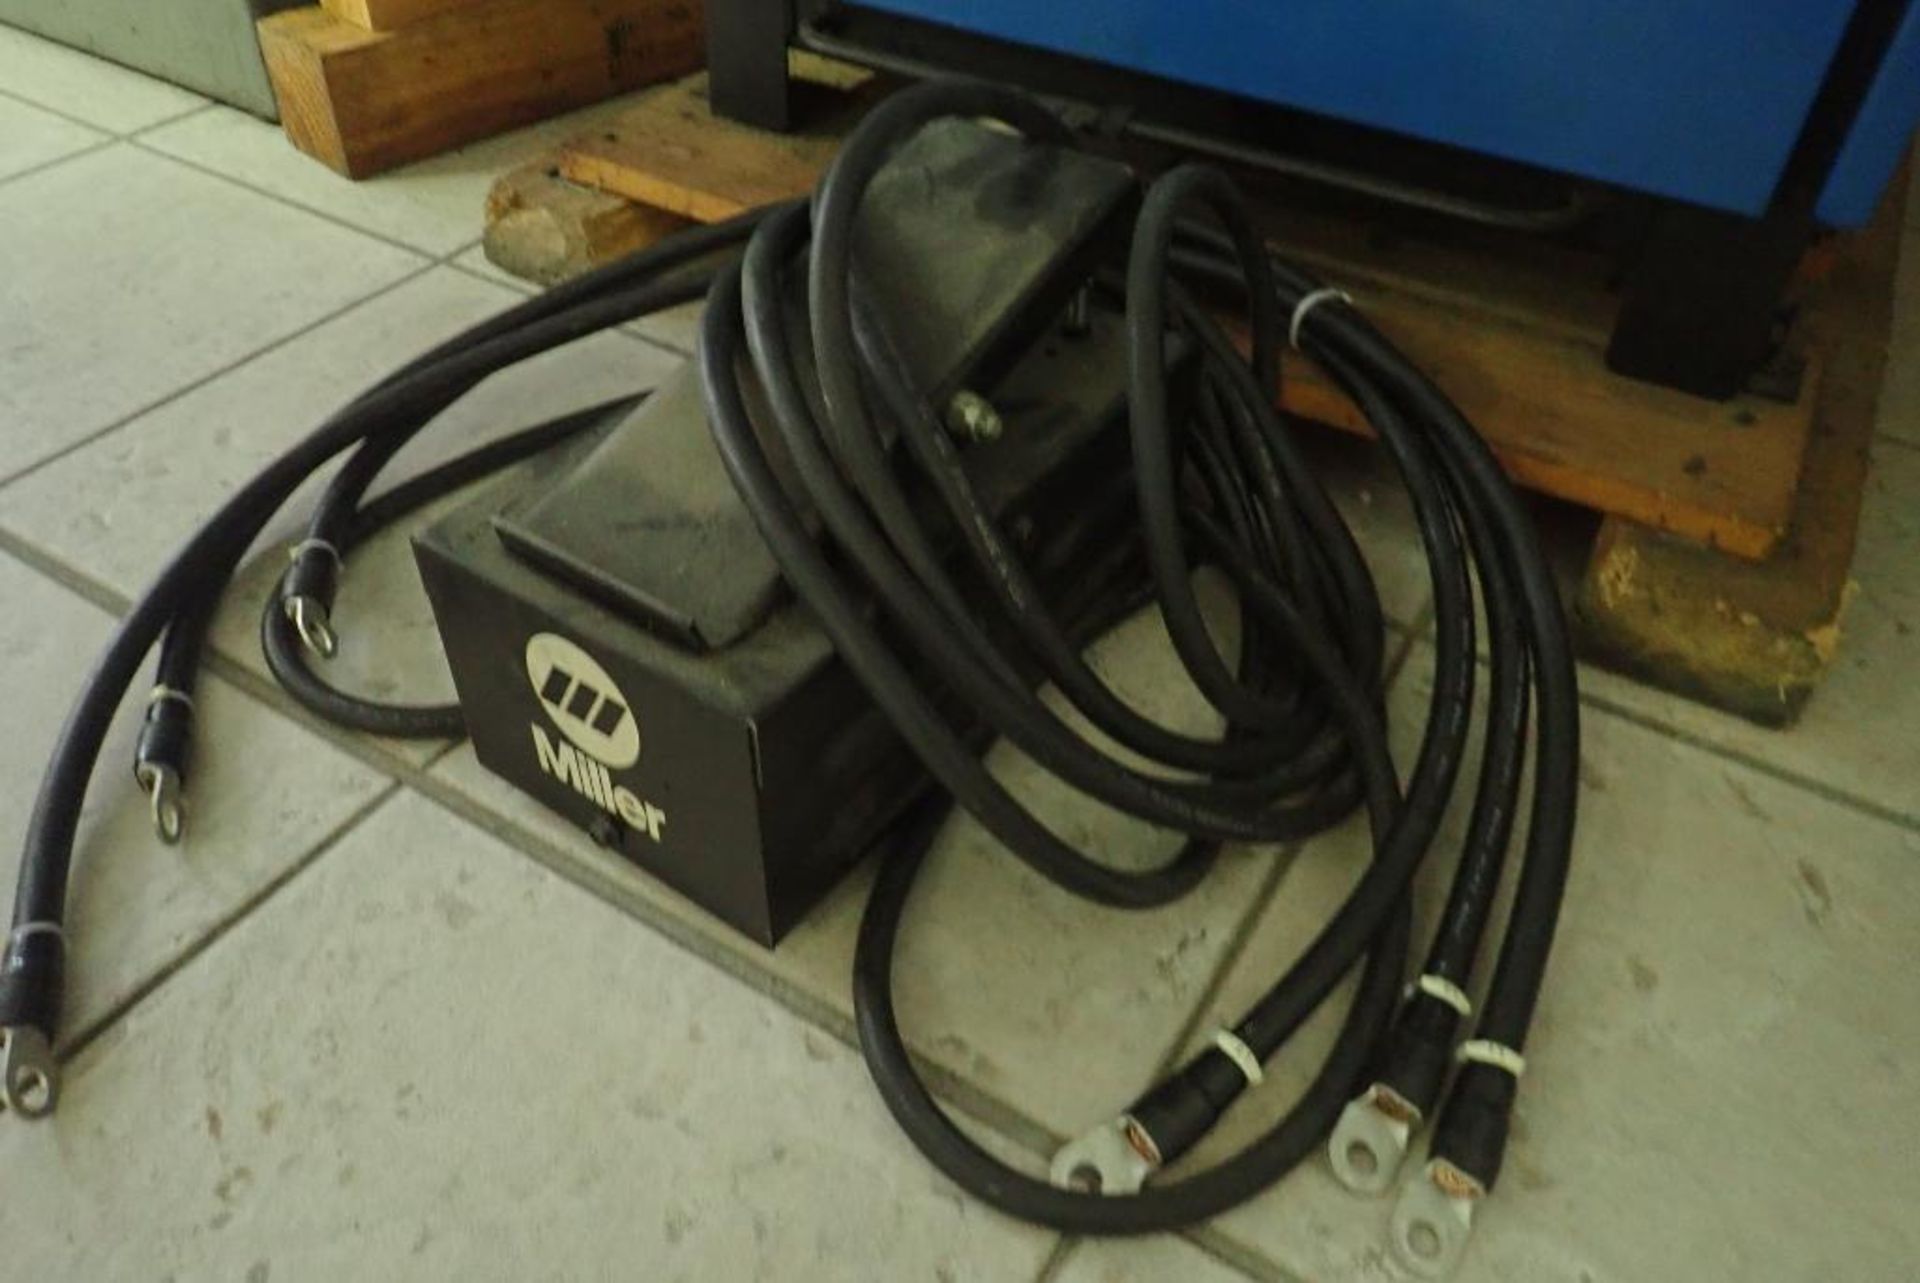 Miller Syncrowave 351 Constant Current AC/DC Arc Welder w/ Foot Control. - Image 3 of 4